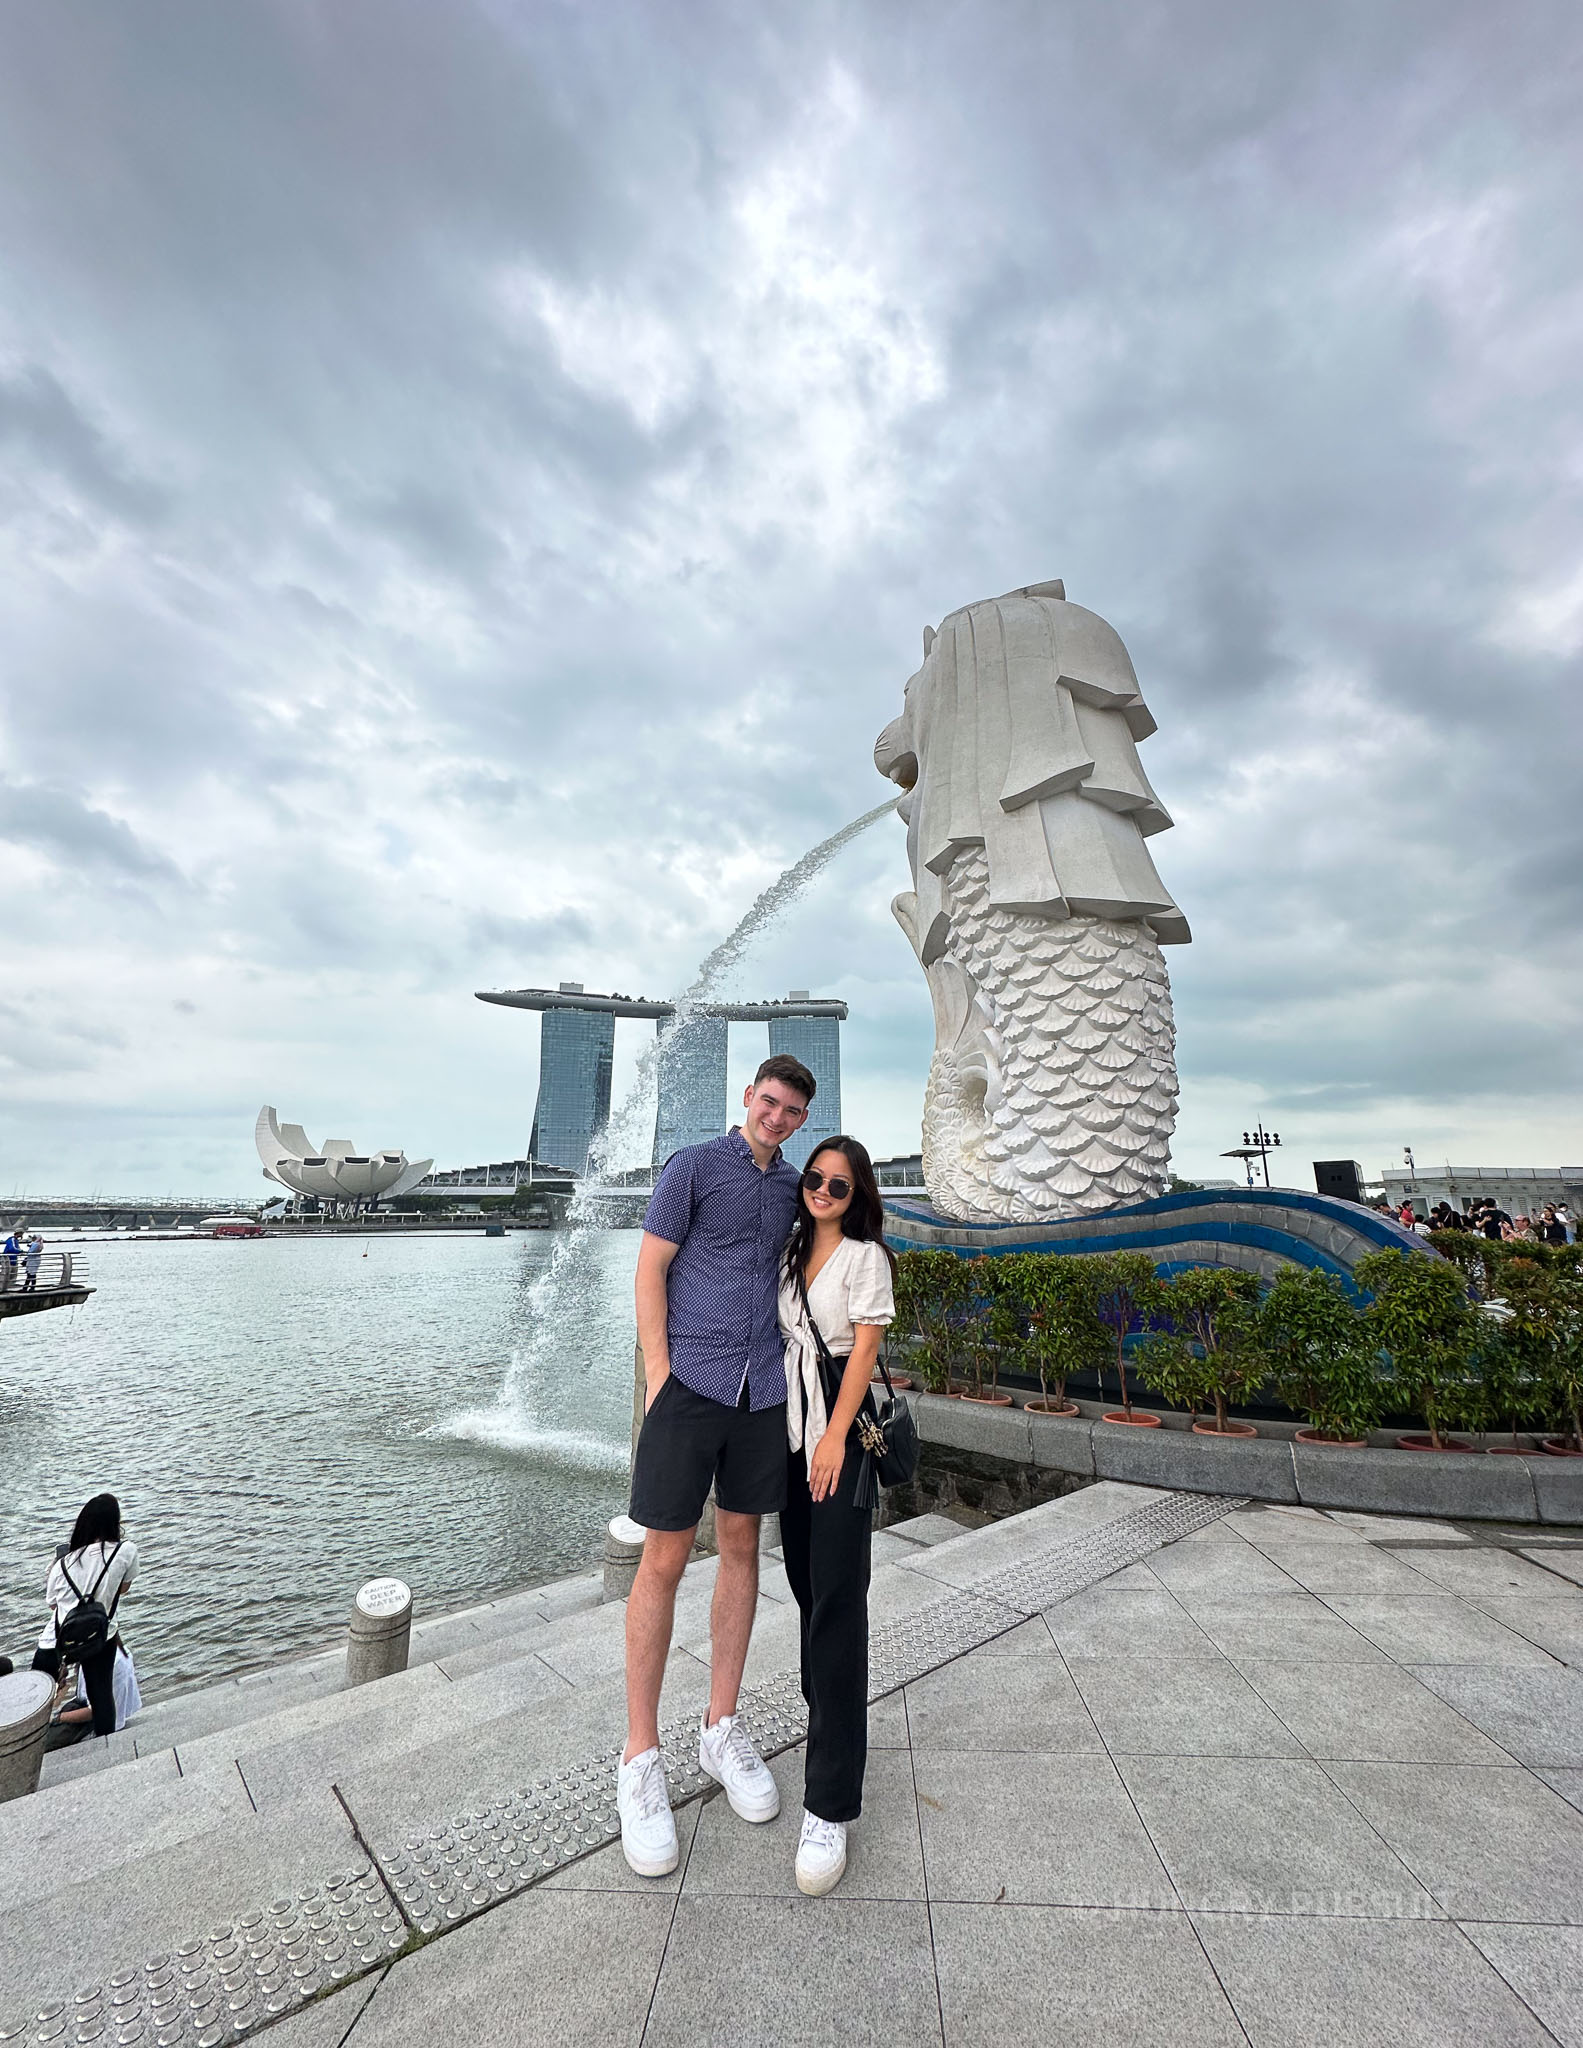 Couple striking a pose in front of the iconic Merlion statue, a famous landmark in Singapore